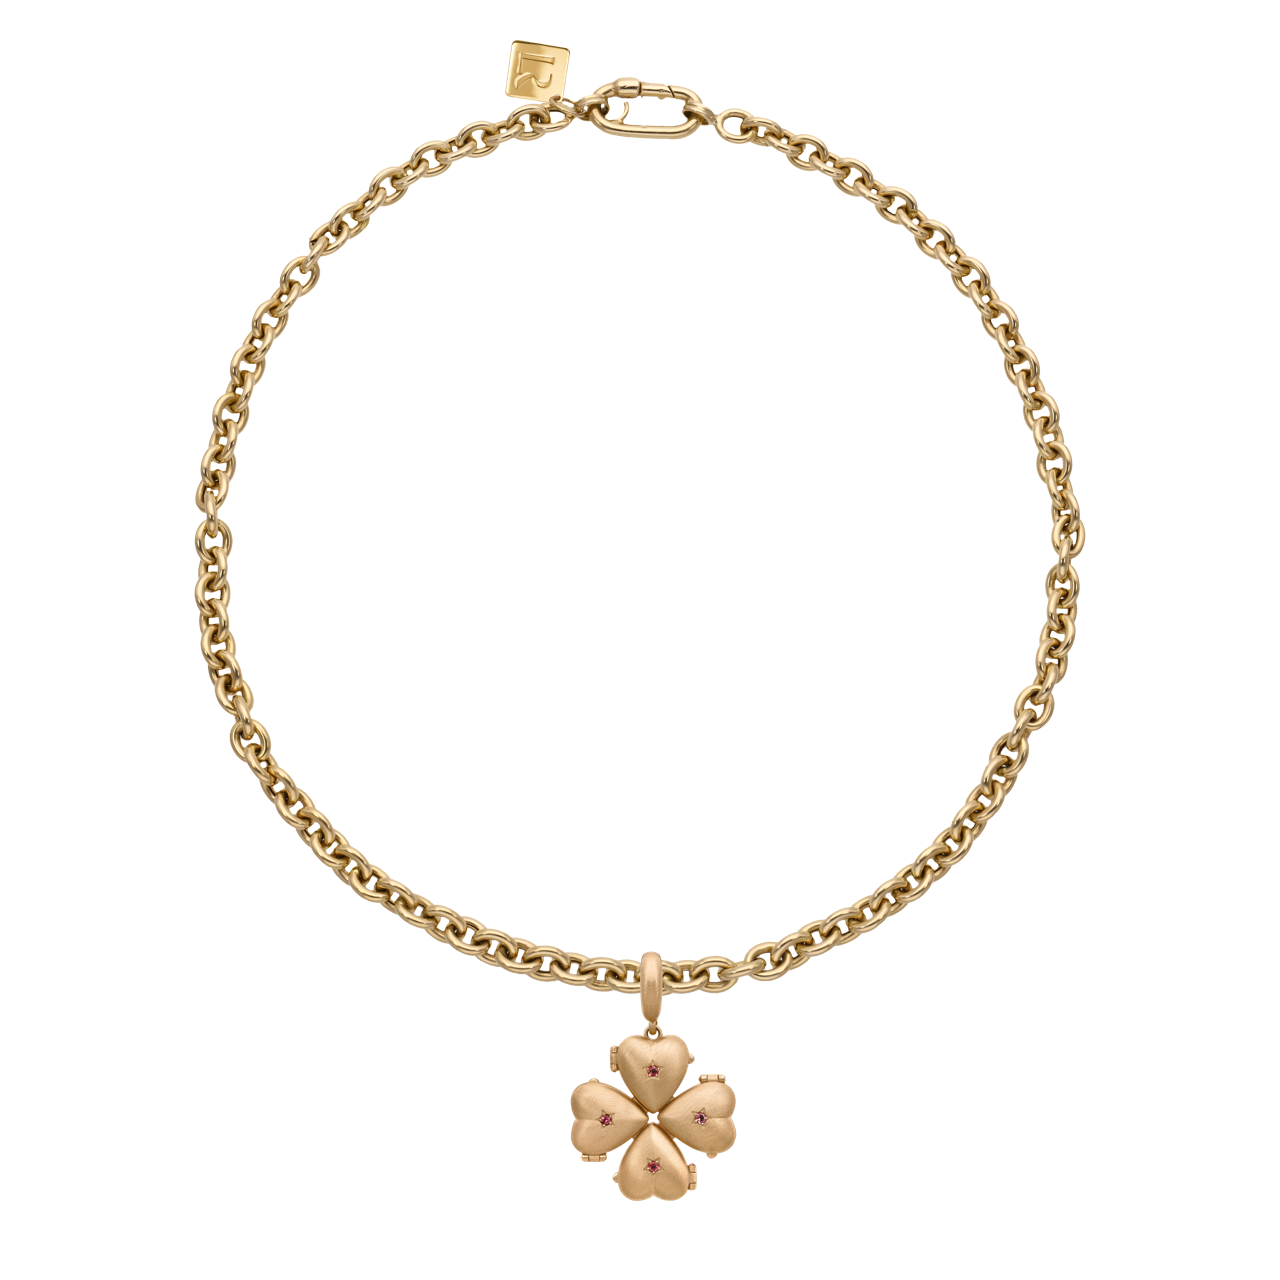 BRUNO - 14K Brushed Yellow Gold & Tourmaline Small Clover Necklace